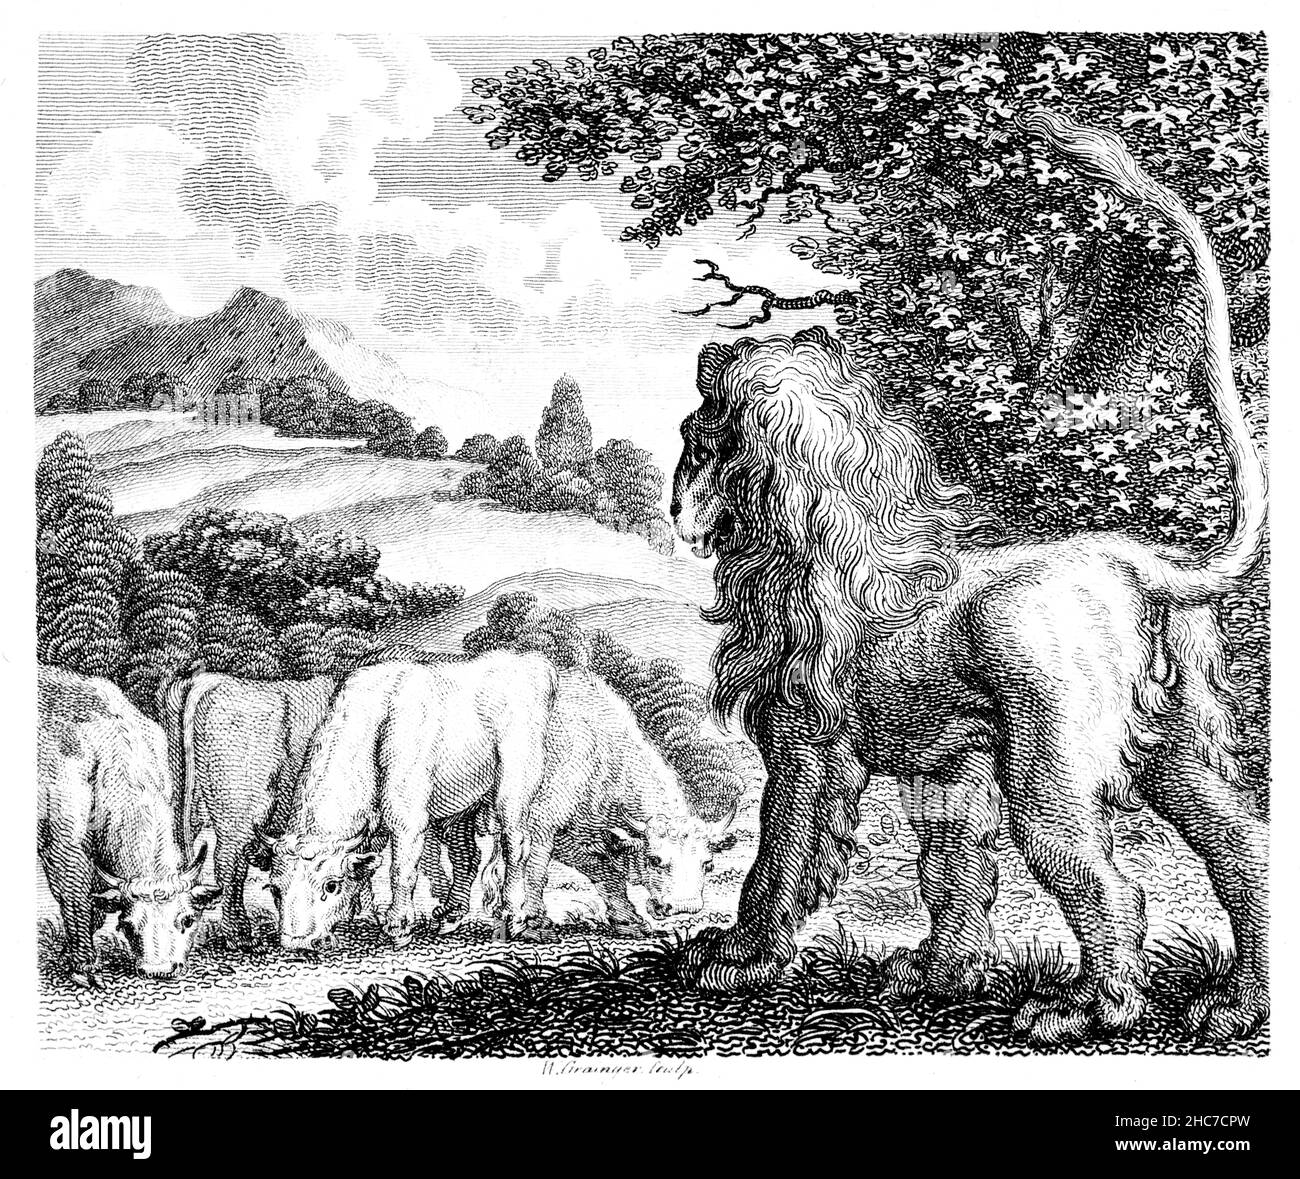 engraved illustration of The Bulls and the Lion, tale of strength in numbers, from 1793 First Edition of Stockdale’s Aesop’s Fables Stock Photo